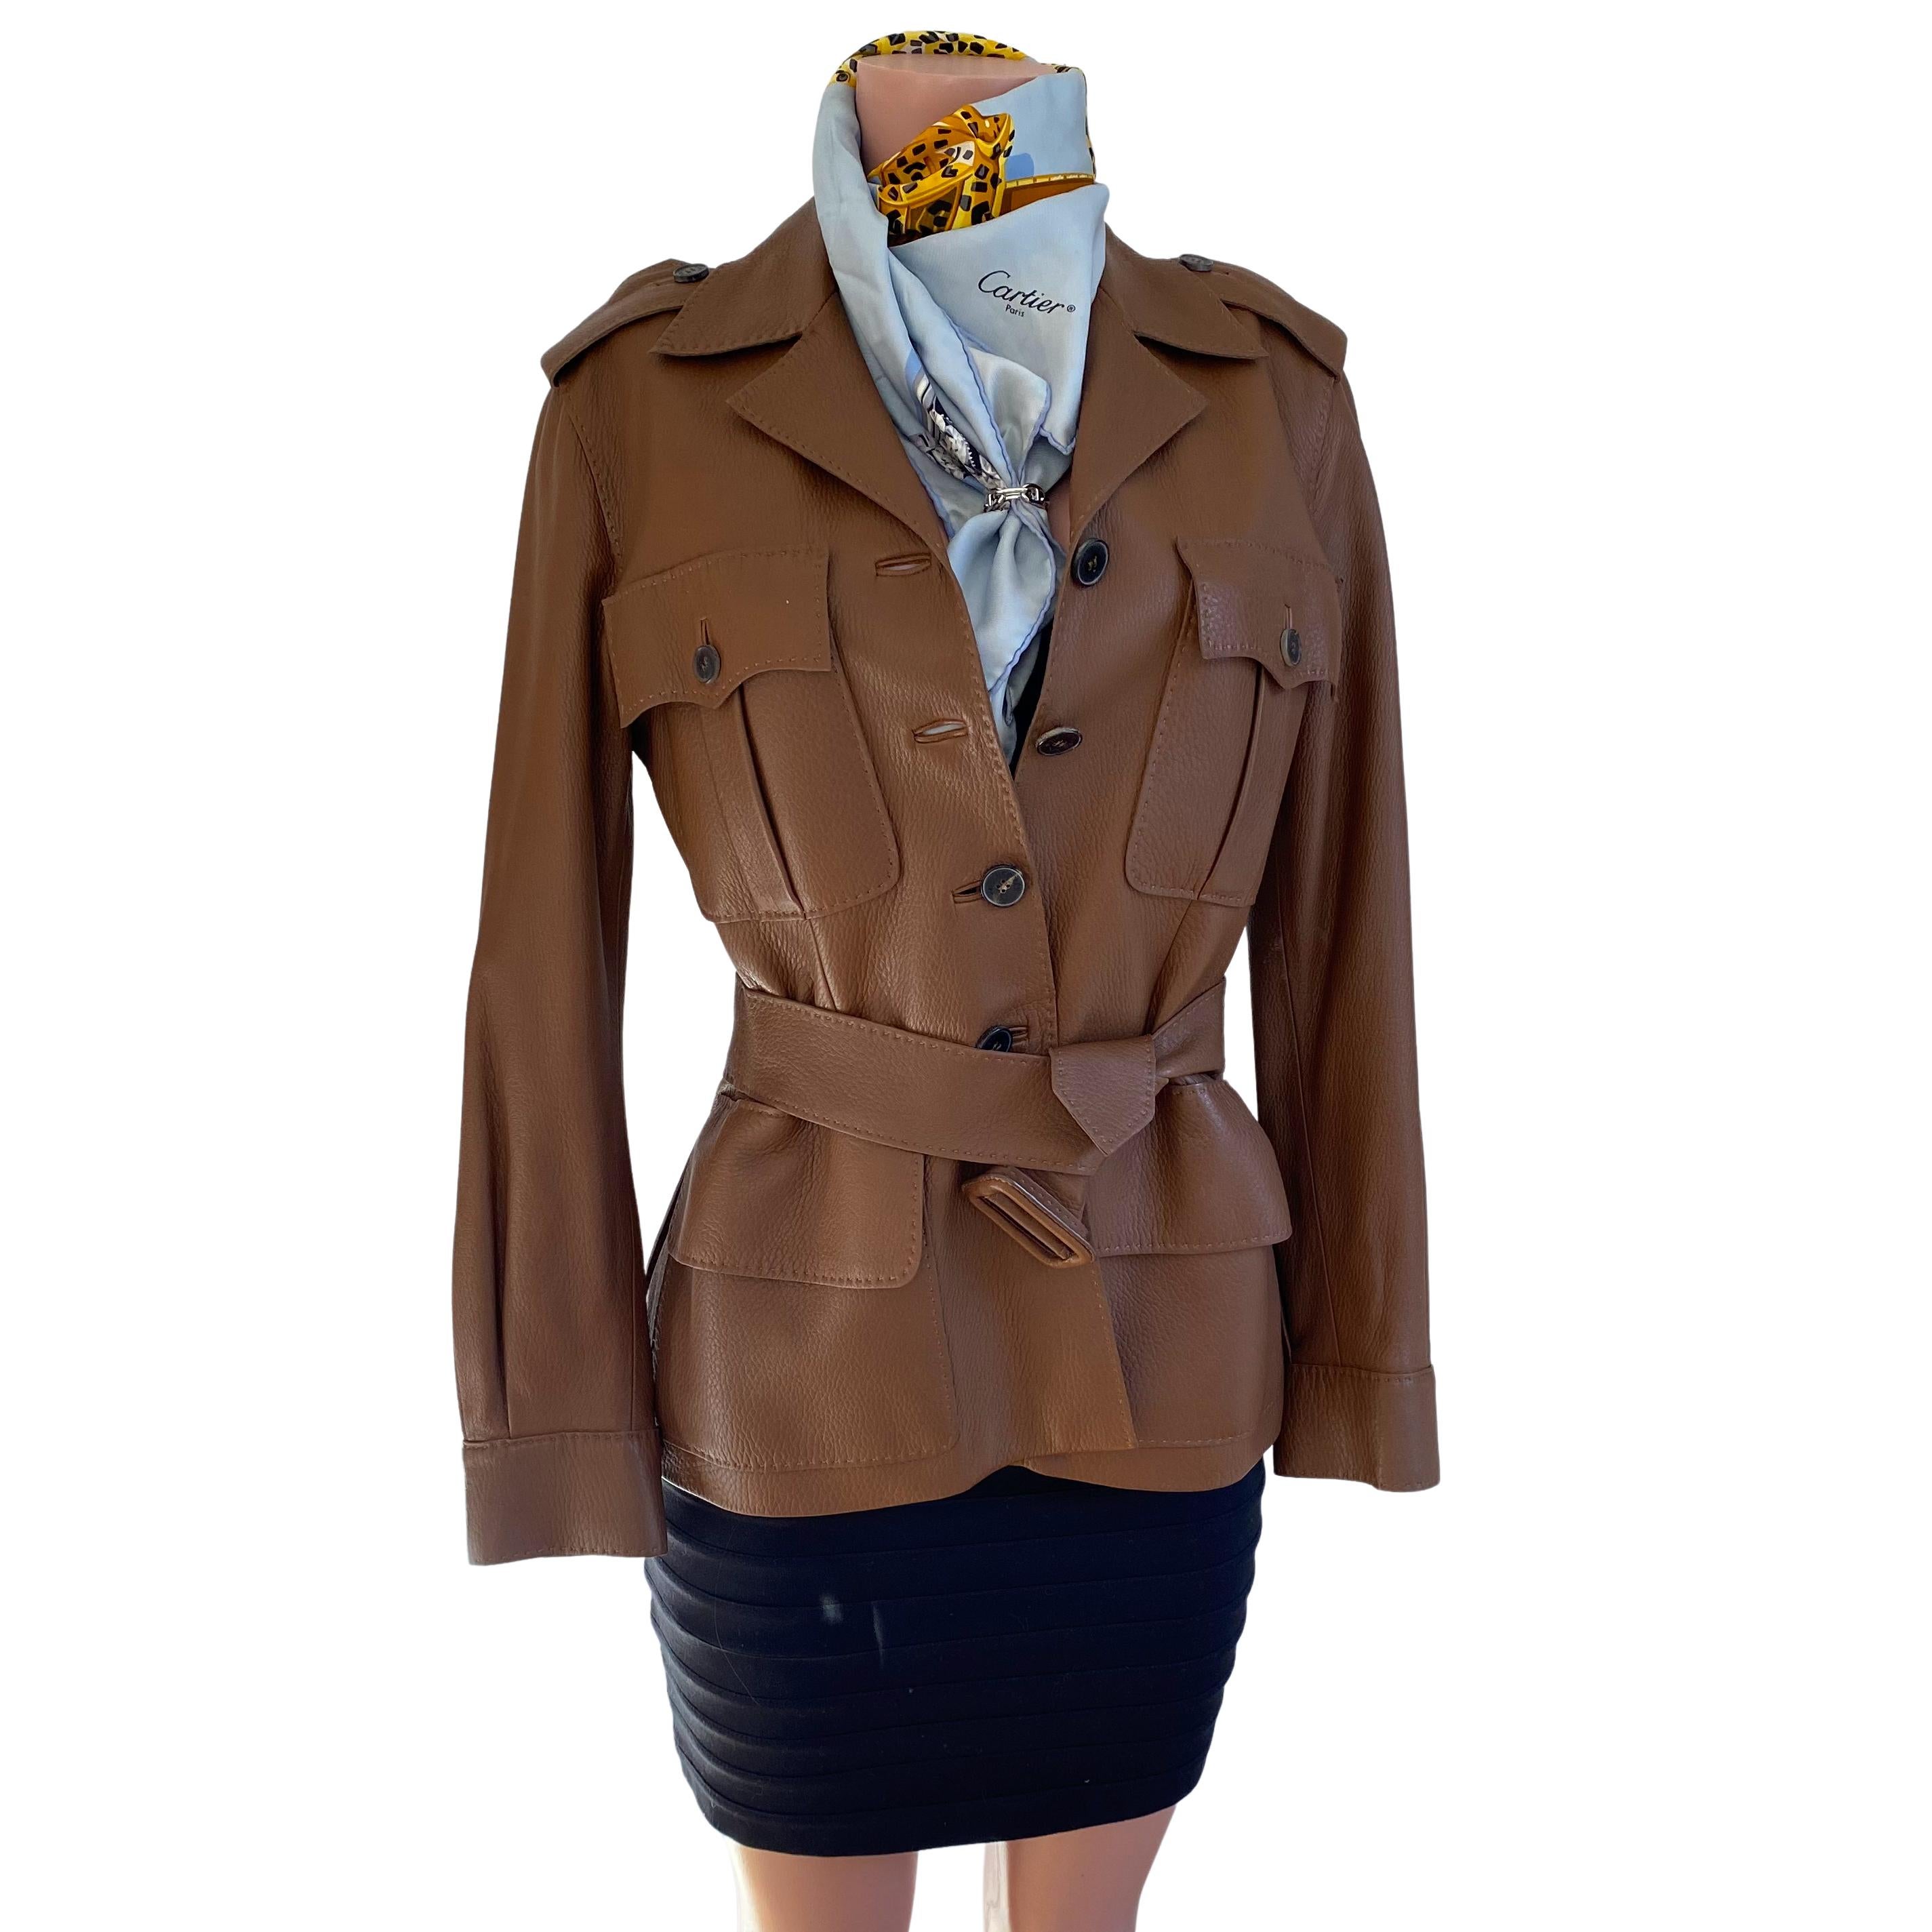 Hermès saddle leather safari biker jacket.
Flattering deep back vents will show off the waist and curve - all so effortlessly.
Let them know it's HERMÈS by the 12 Hermès Paris logo etched on natural horn buttons.
Lined in Hermès ribbons weaved 100%